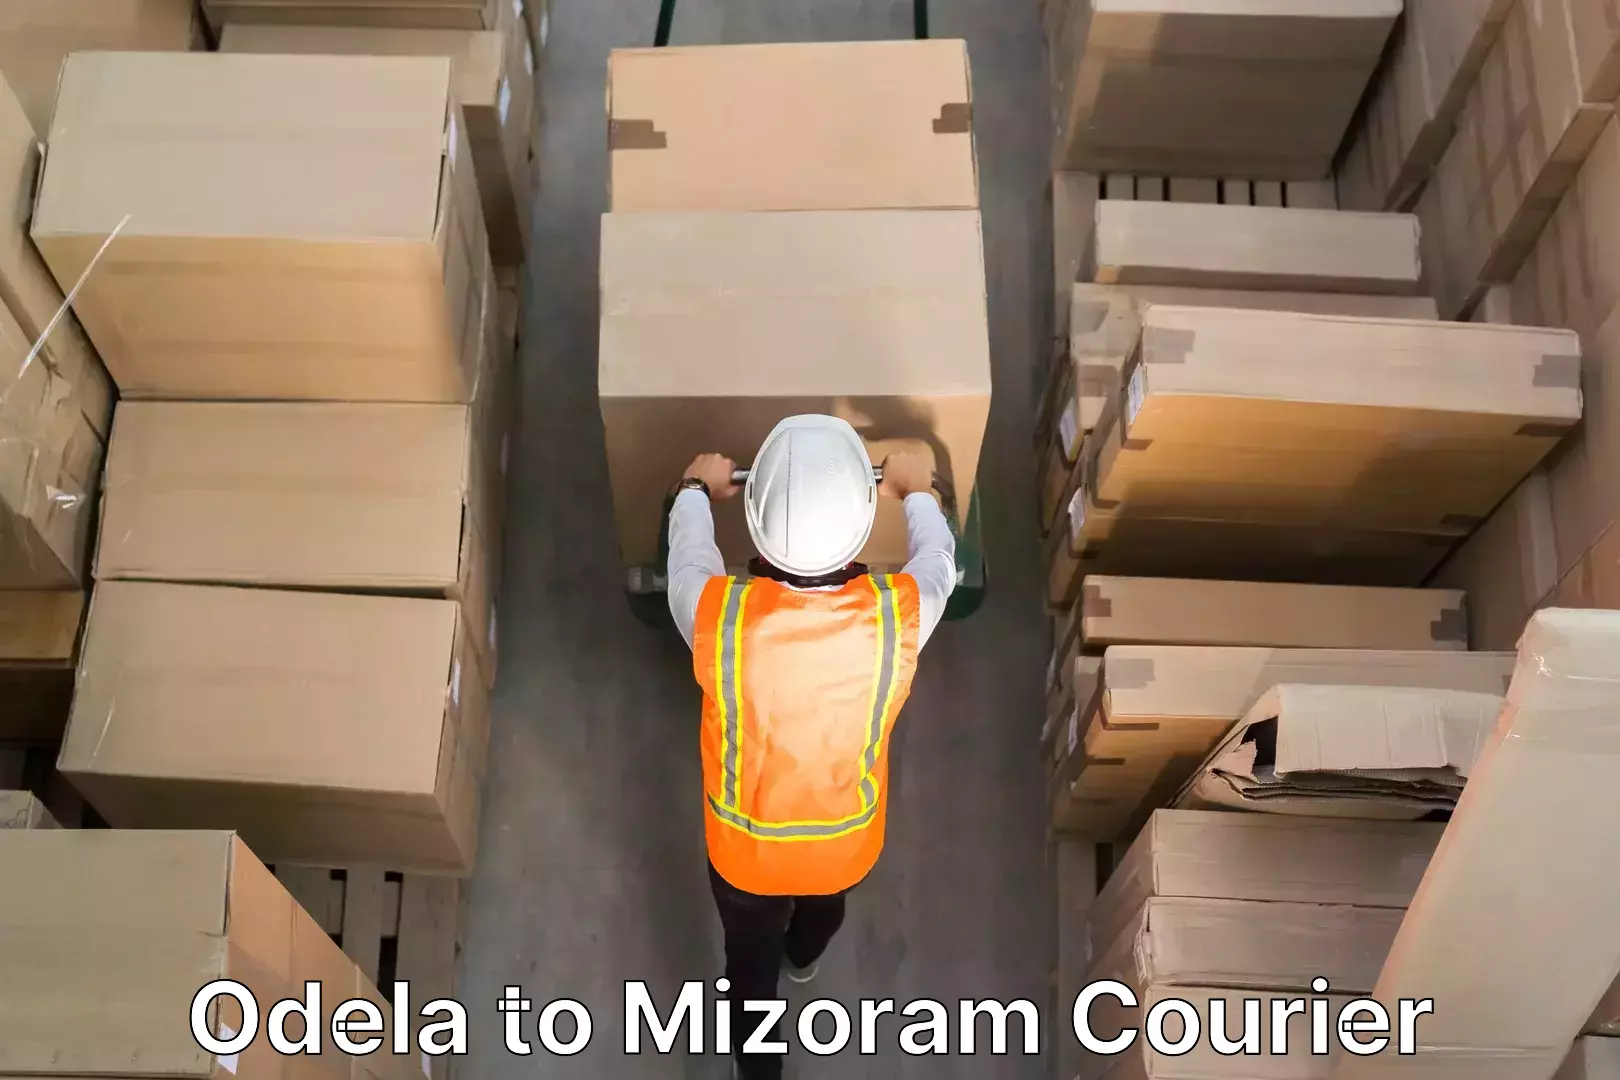 Trusted relocation experts Odela to Mizoram